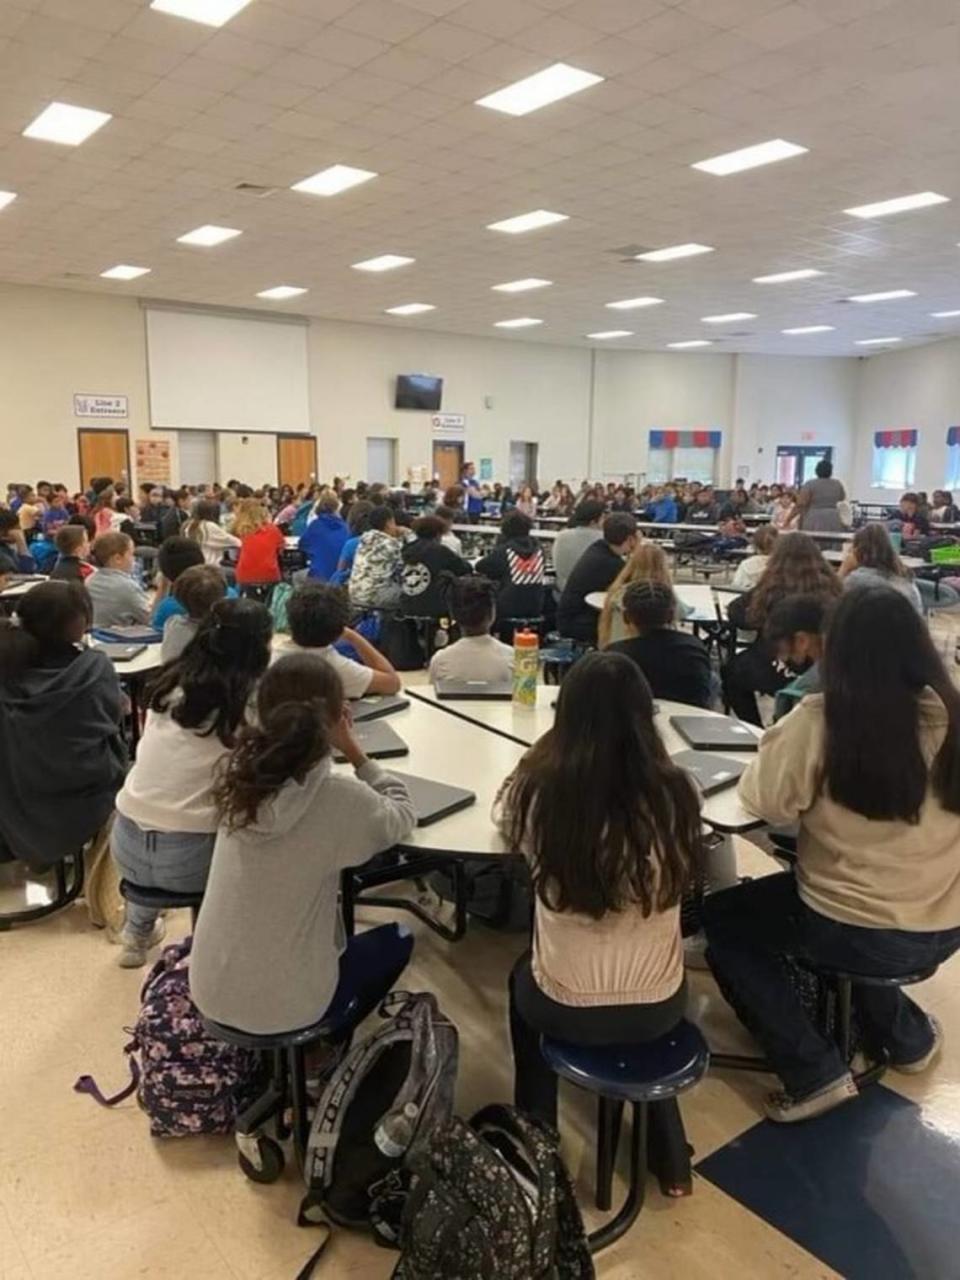 Cabarrus County Schools is considering plans that would result in districtwide realignment to alleviate overcrowding in schools.